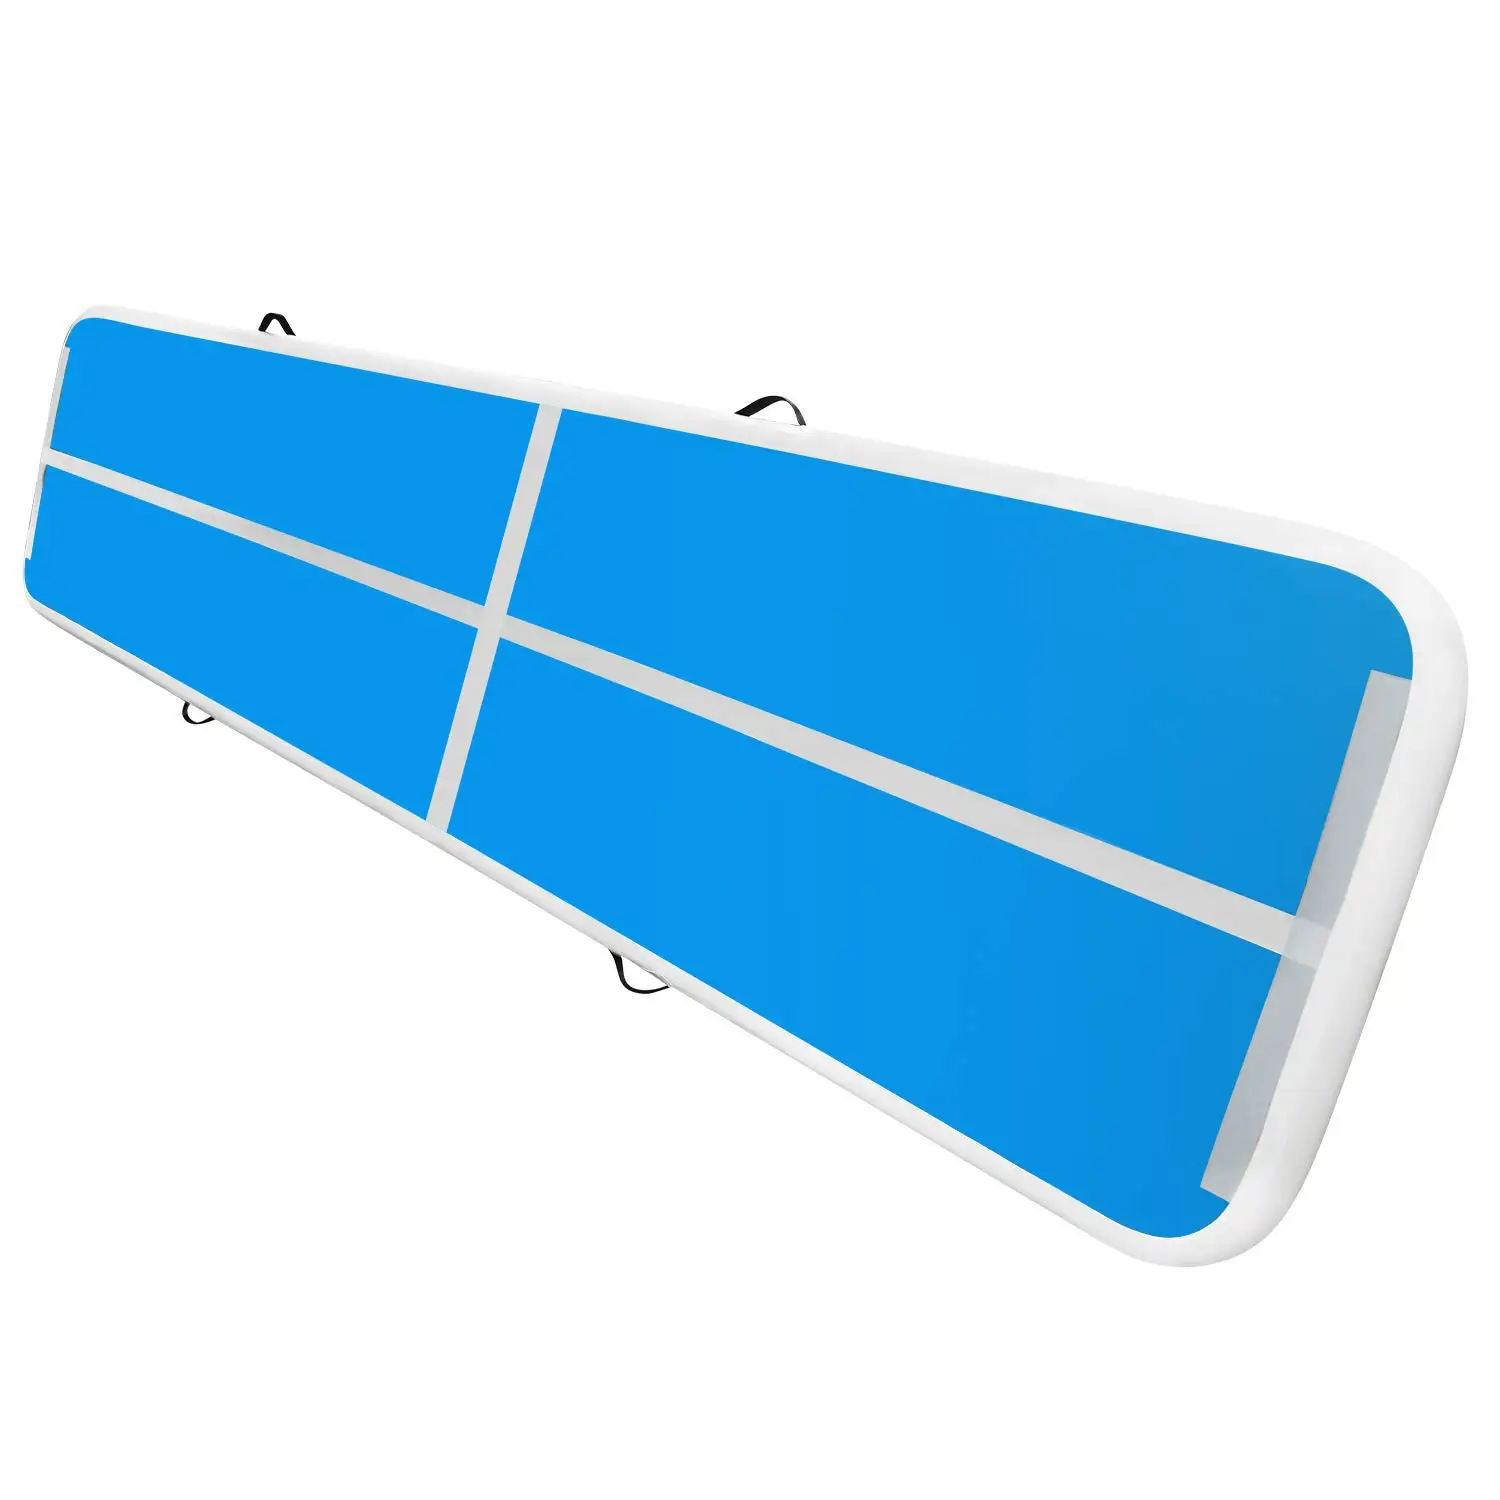 

Free Shipping 4*1*0.2m 0.8mm PVC Inflatable Air Tumble Track Inflatable Gym Mat For Professional Gymnastics Games Free a Pump